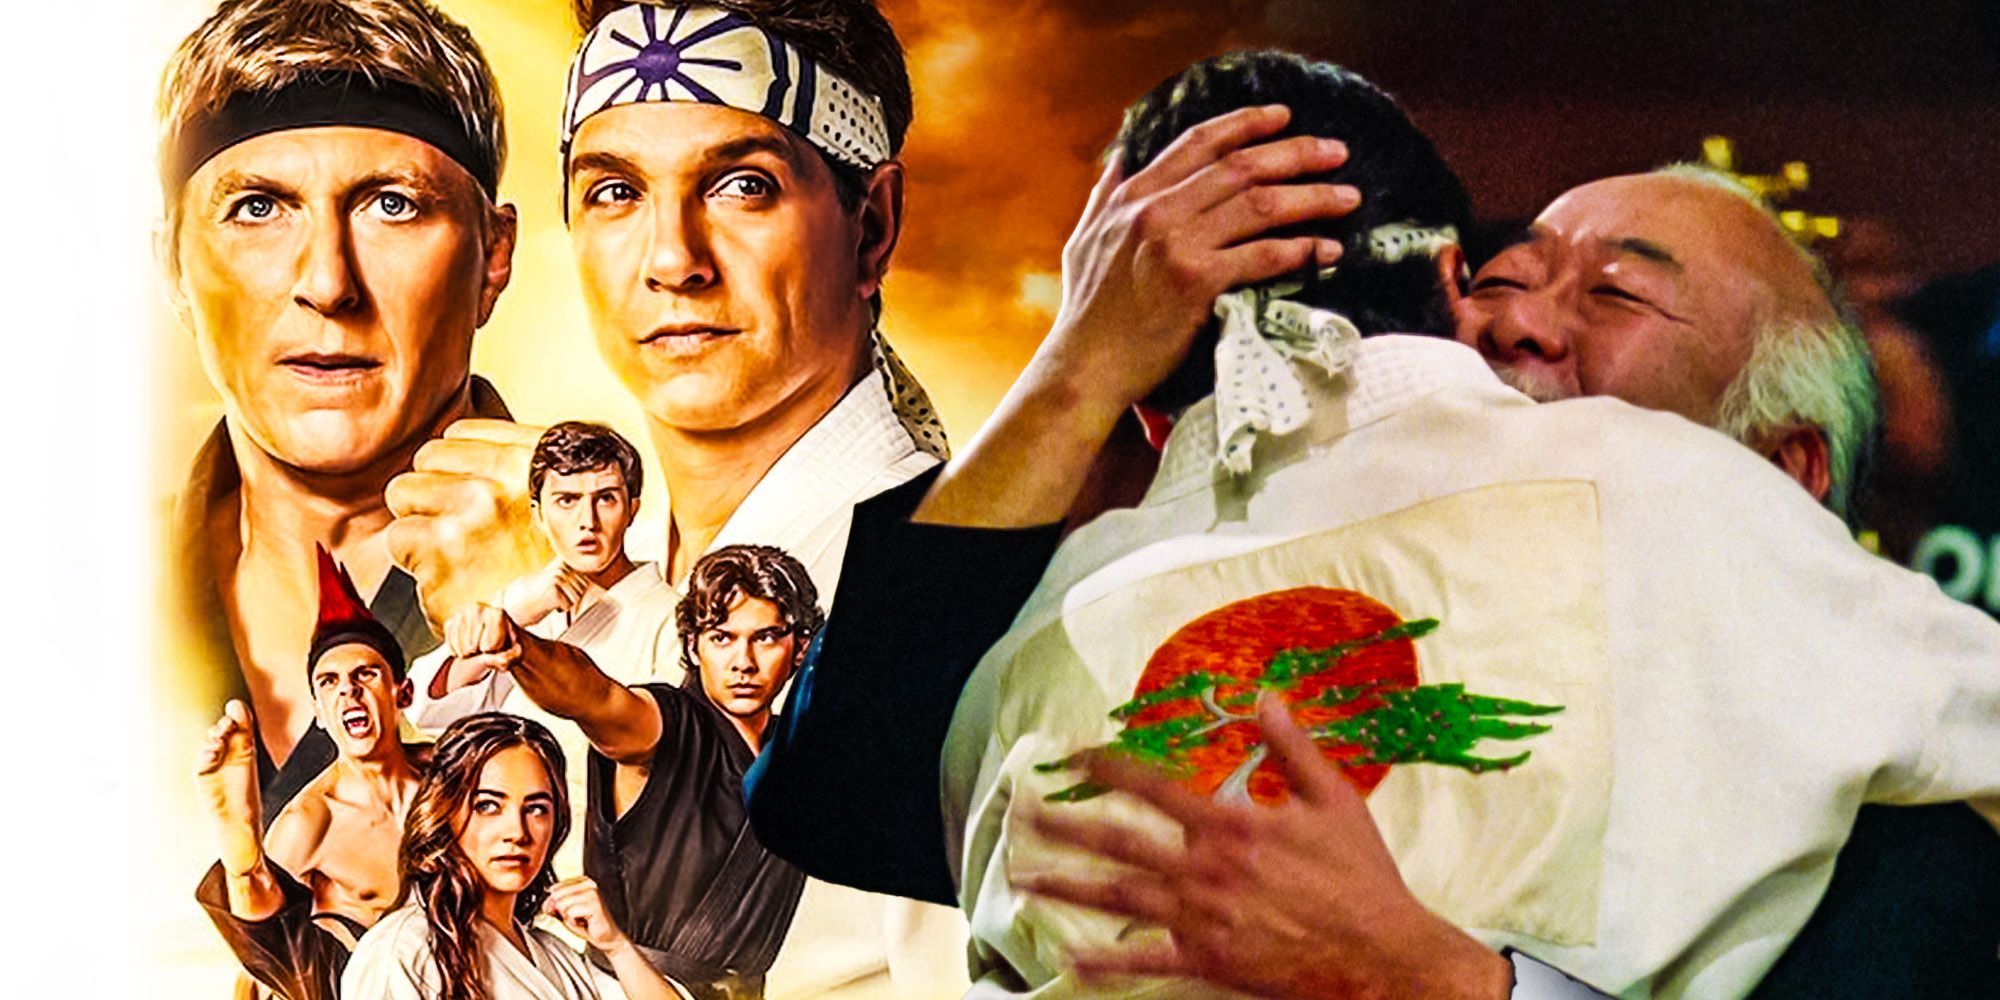 Cobra Kai poster and a scene from The Karate Kid